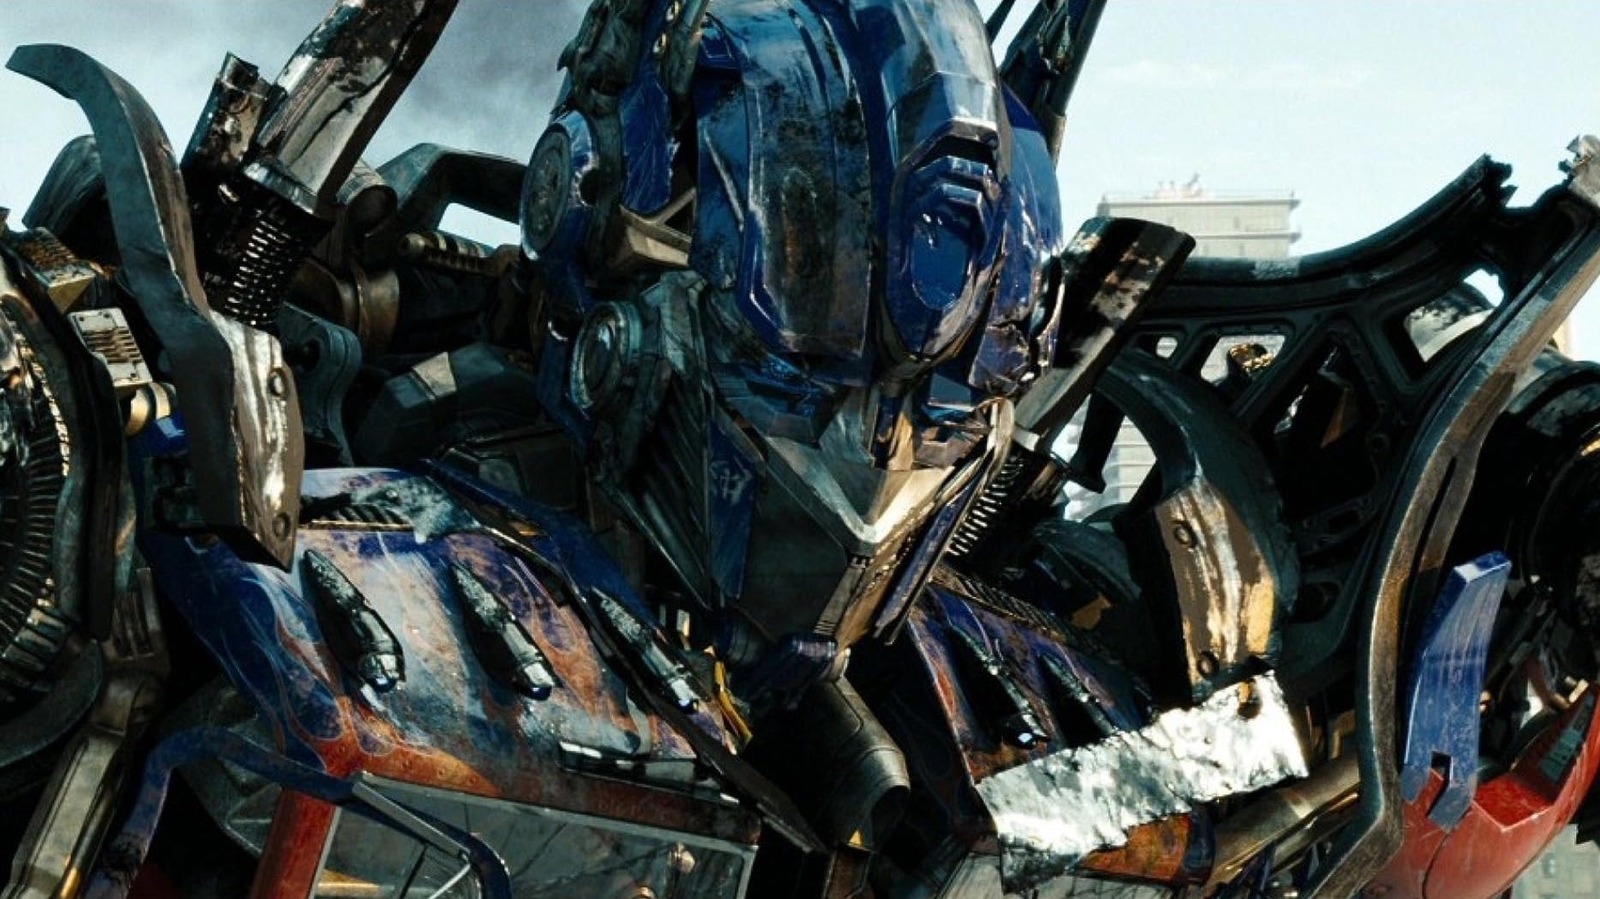 The Transformers Writer Behind Optimus Prime Has A Problem With Michael Bay